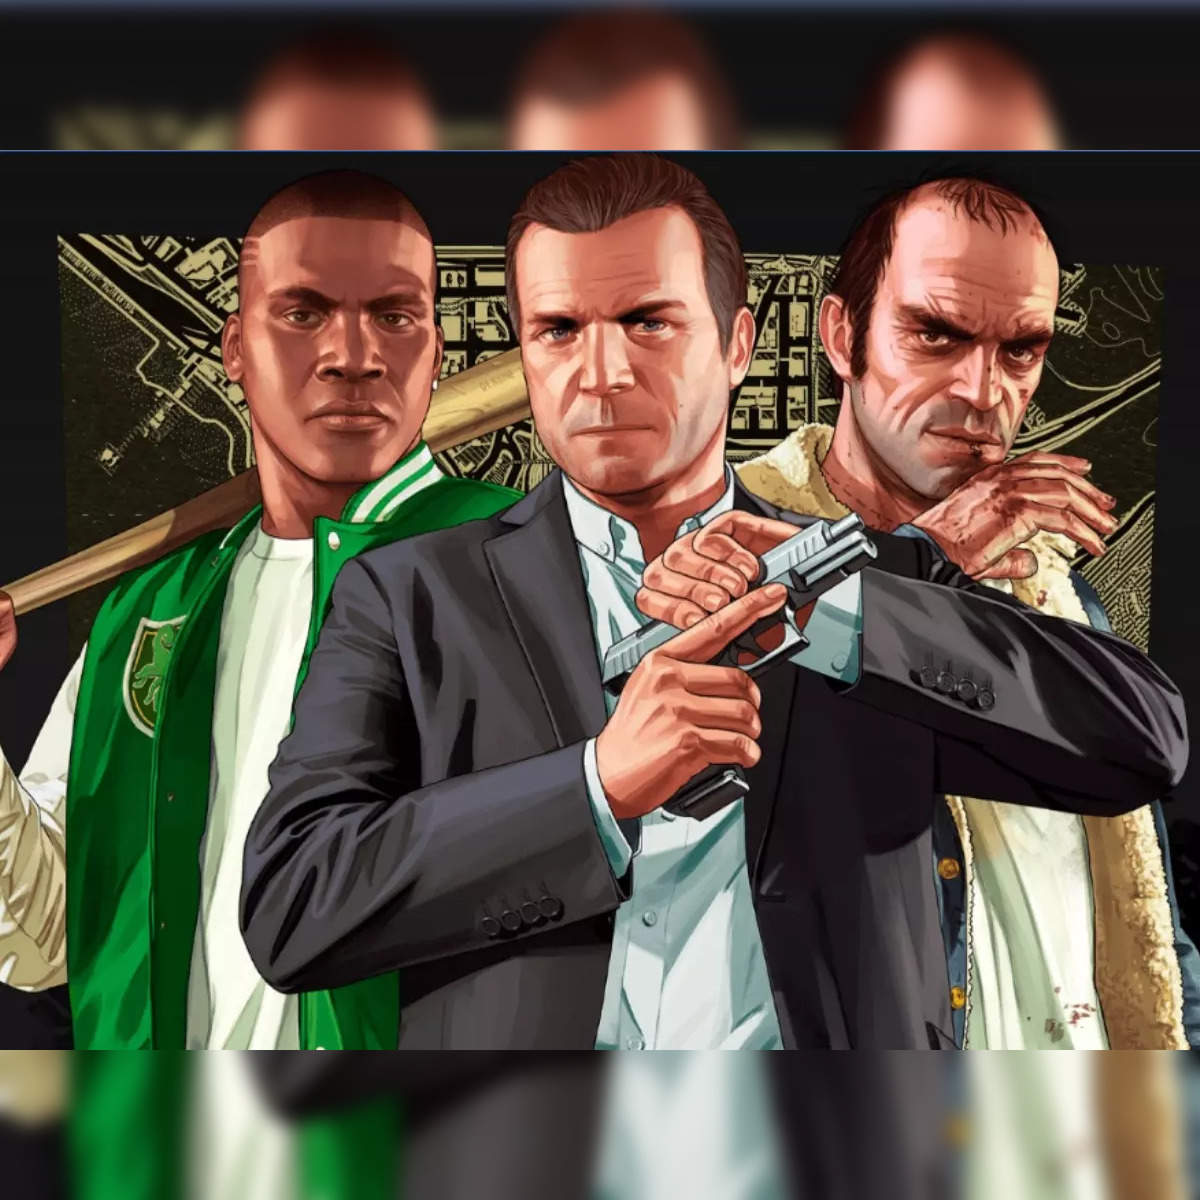 GTA 6 early gameplay videos leaked online: What does this mean for the  gaming industry